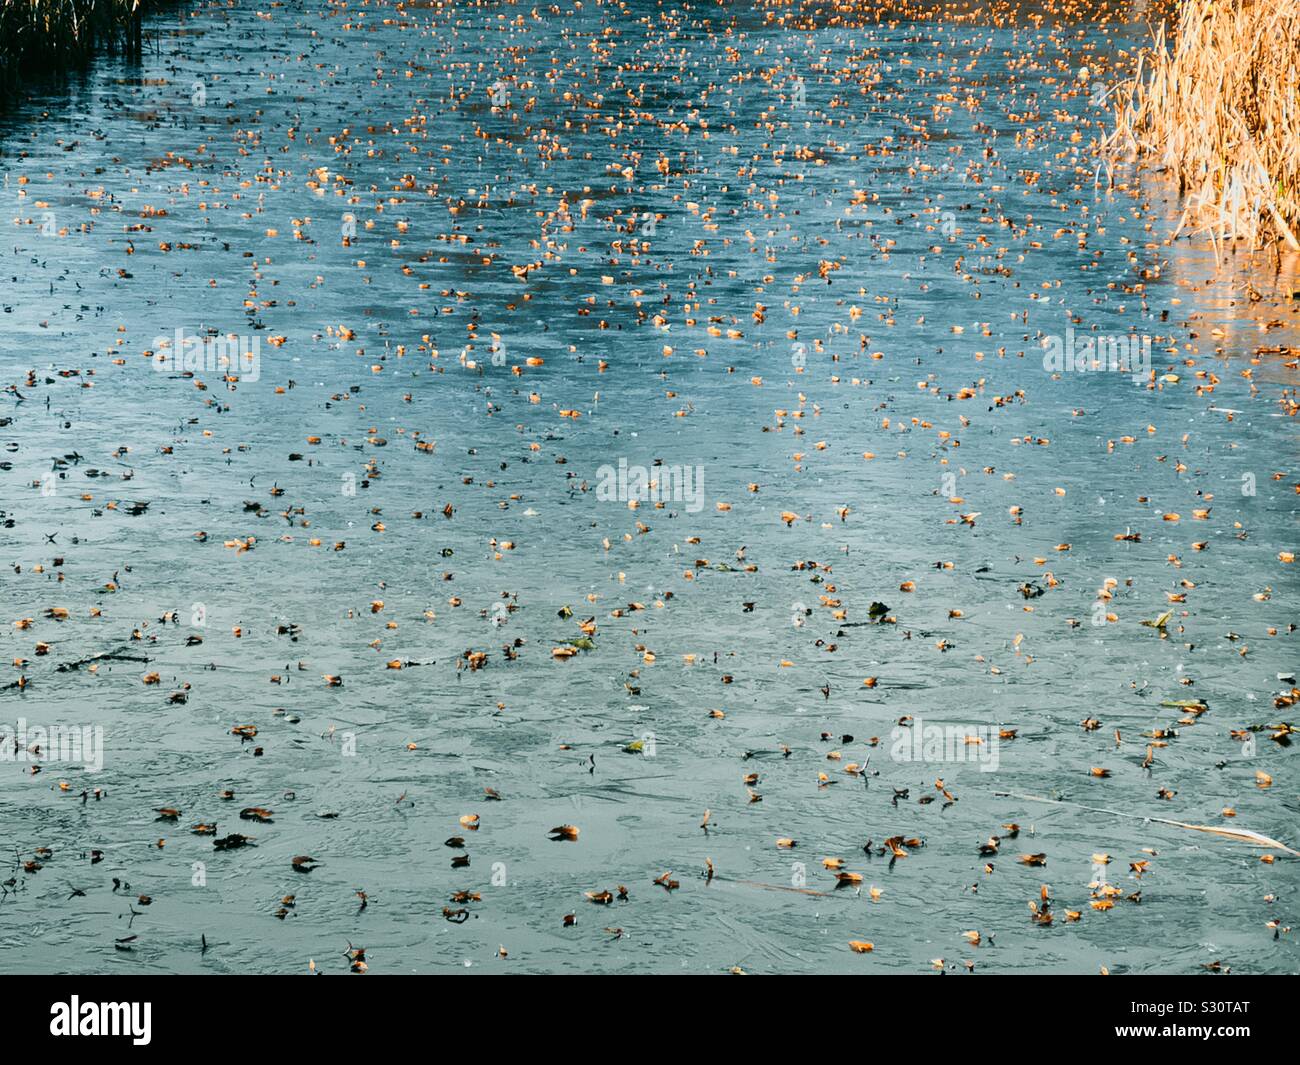 Autumn leaves on surface of frozen lake as seasons change from autumn to winter, Sweden Stock Photo